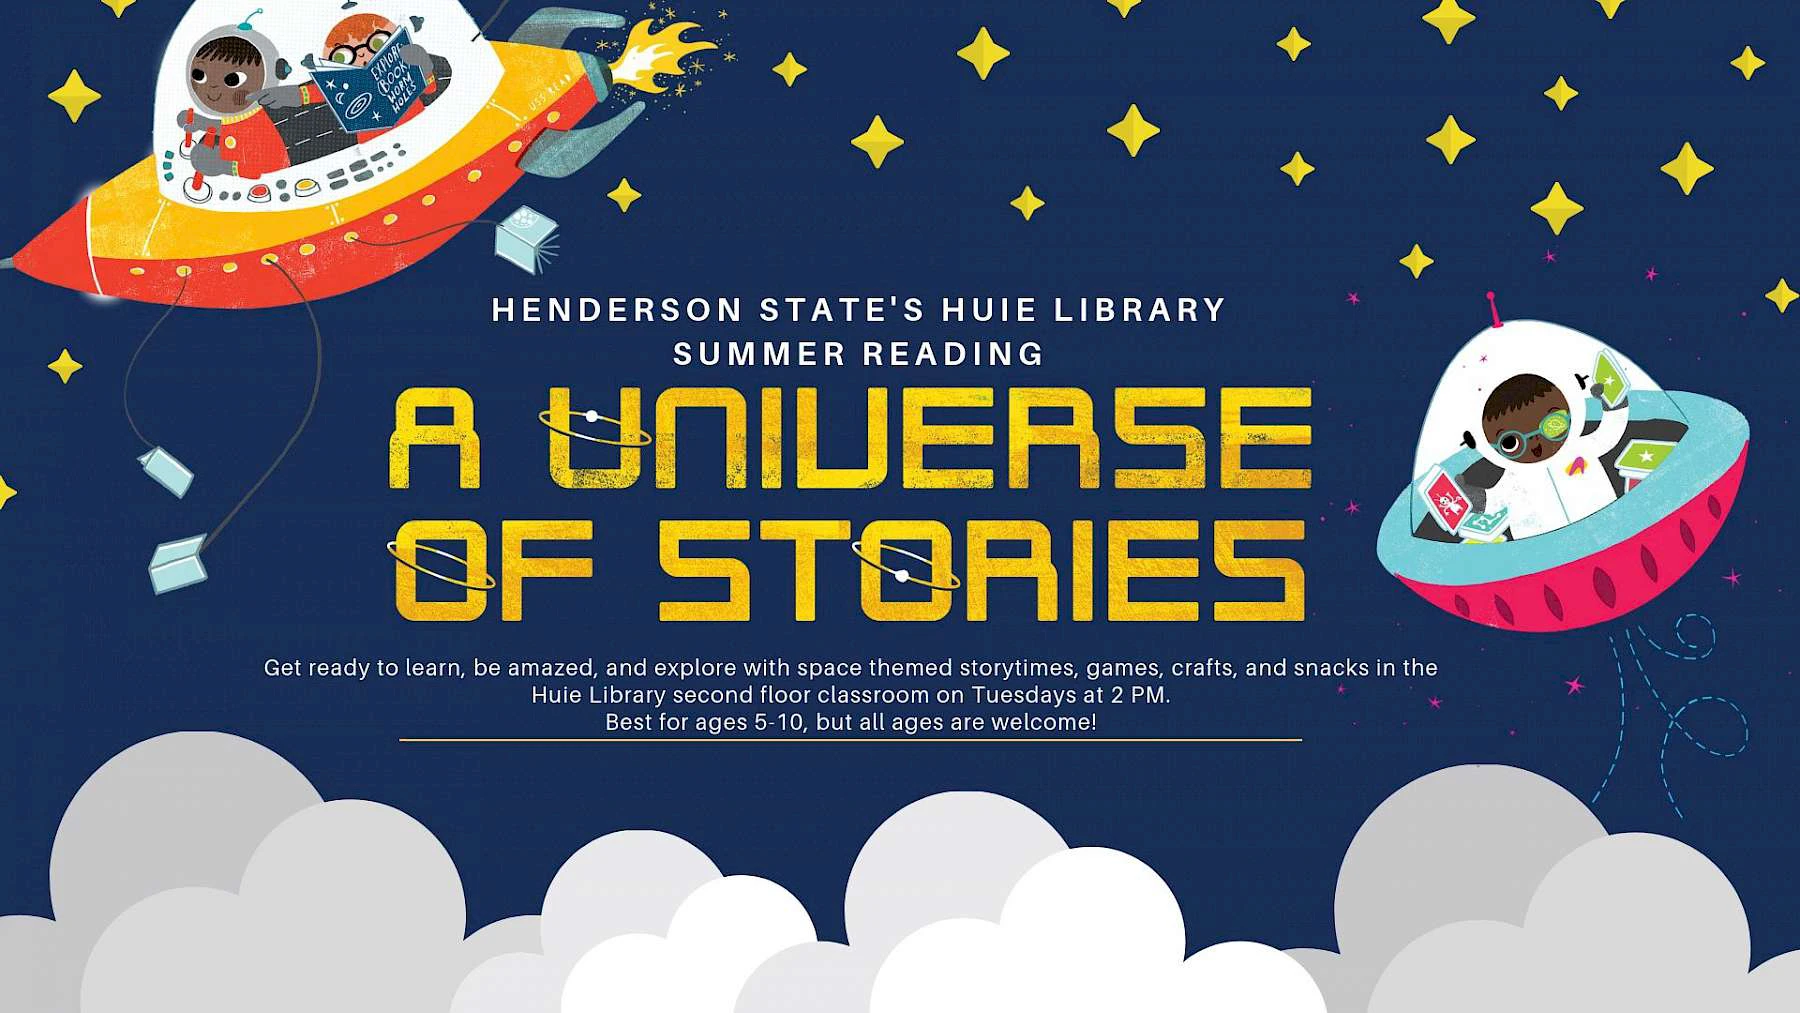 "Henderson State's Huie Library Summer Reading. A Universe of Stories. Get ready to learn, be amazed, and explore with space themed storytimes, games, crafts, and snacks in the Huie Library second floor classroom on Tuesdays at 2 PM.  Best for ages 5-10, but all ages are welcome!" With stars, clouds, and kids reading in space ships